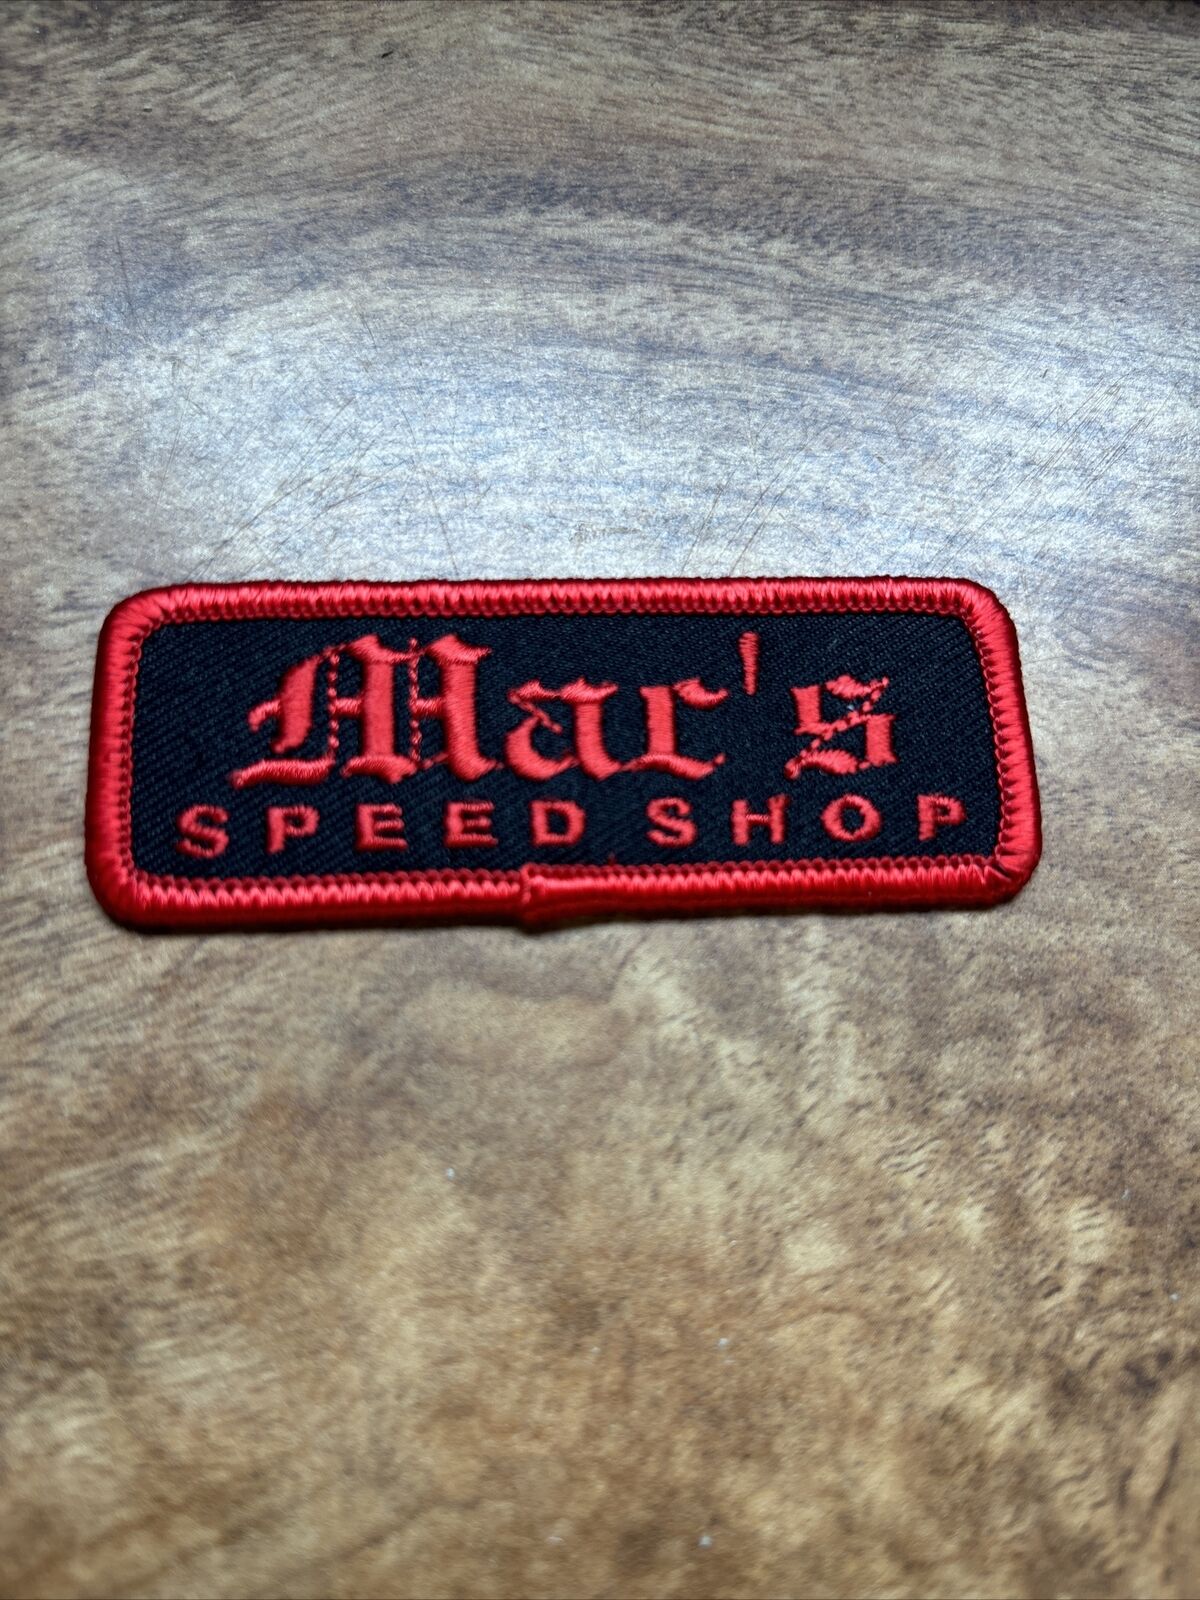 MOTORCYCLE PATCH MAC'S SPEED SHOP GREENVILLE SC CHARLOTTE NC Iron On 3” Mac